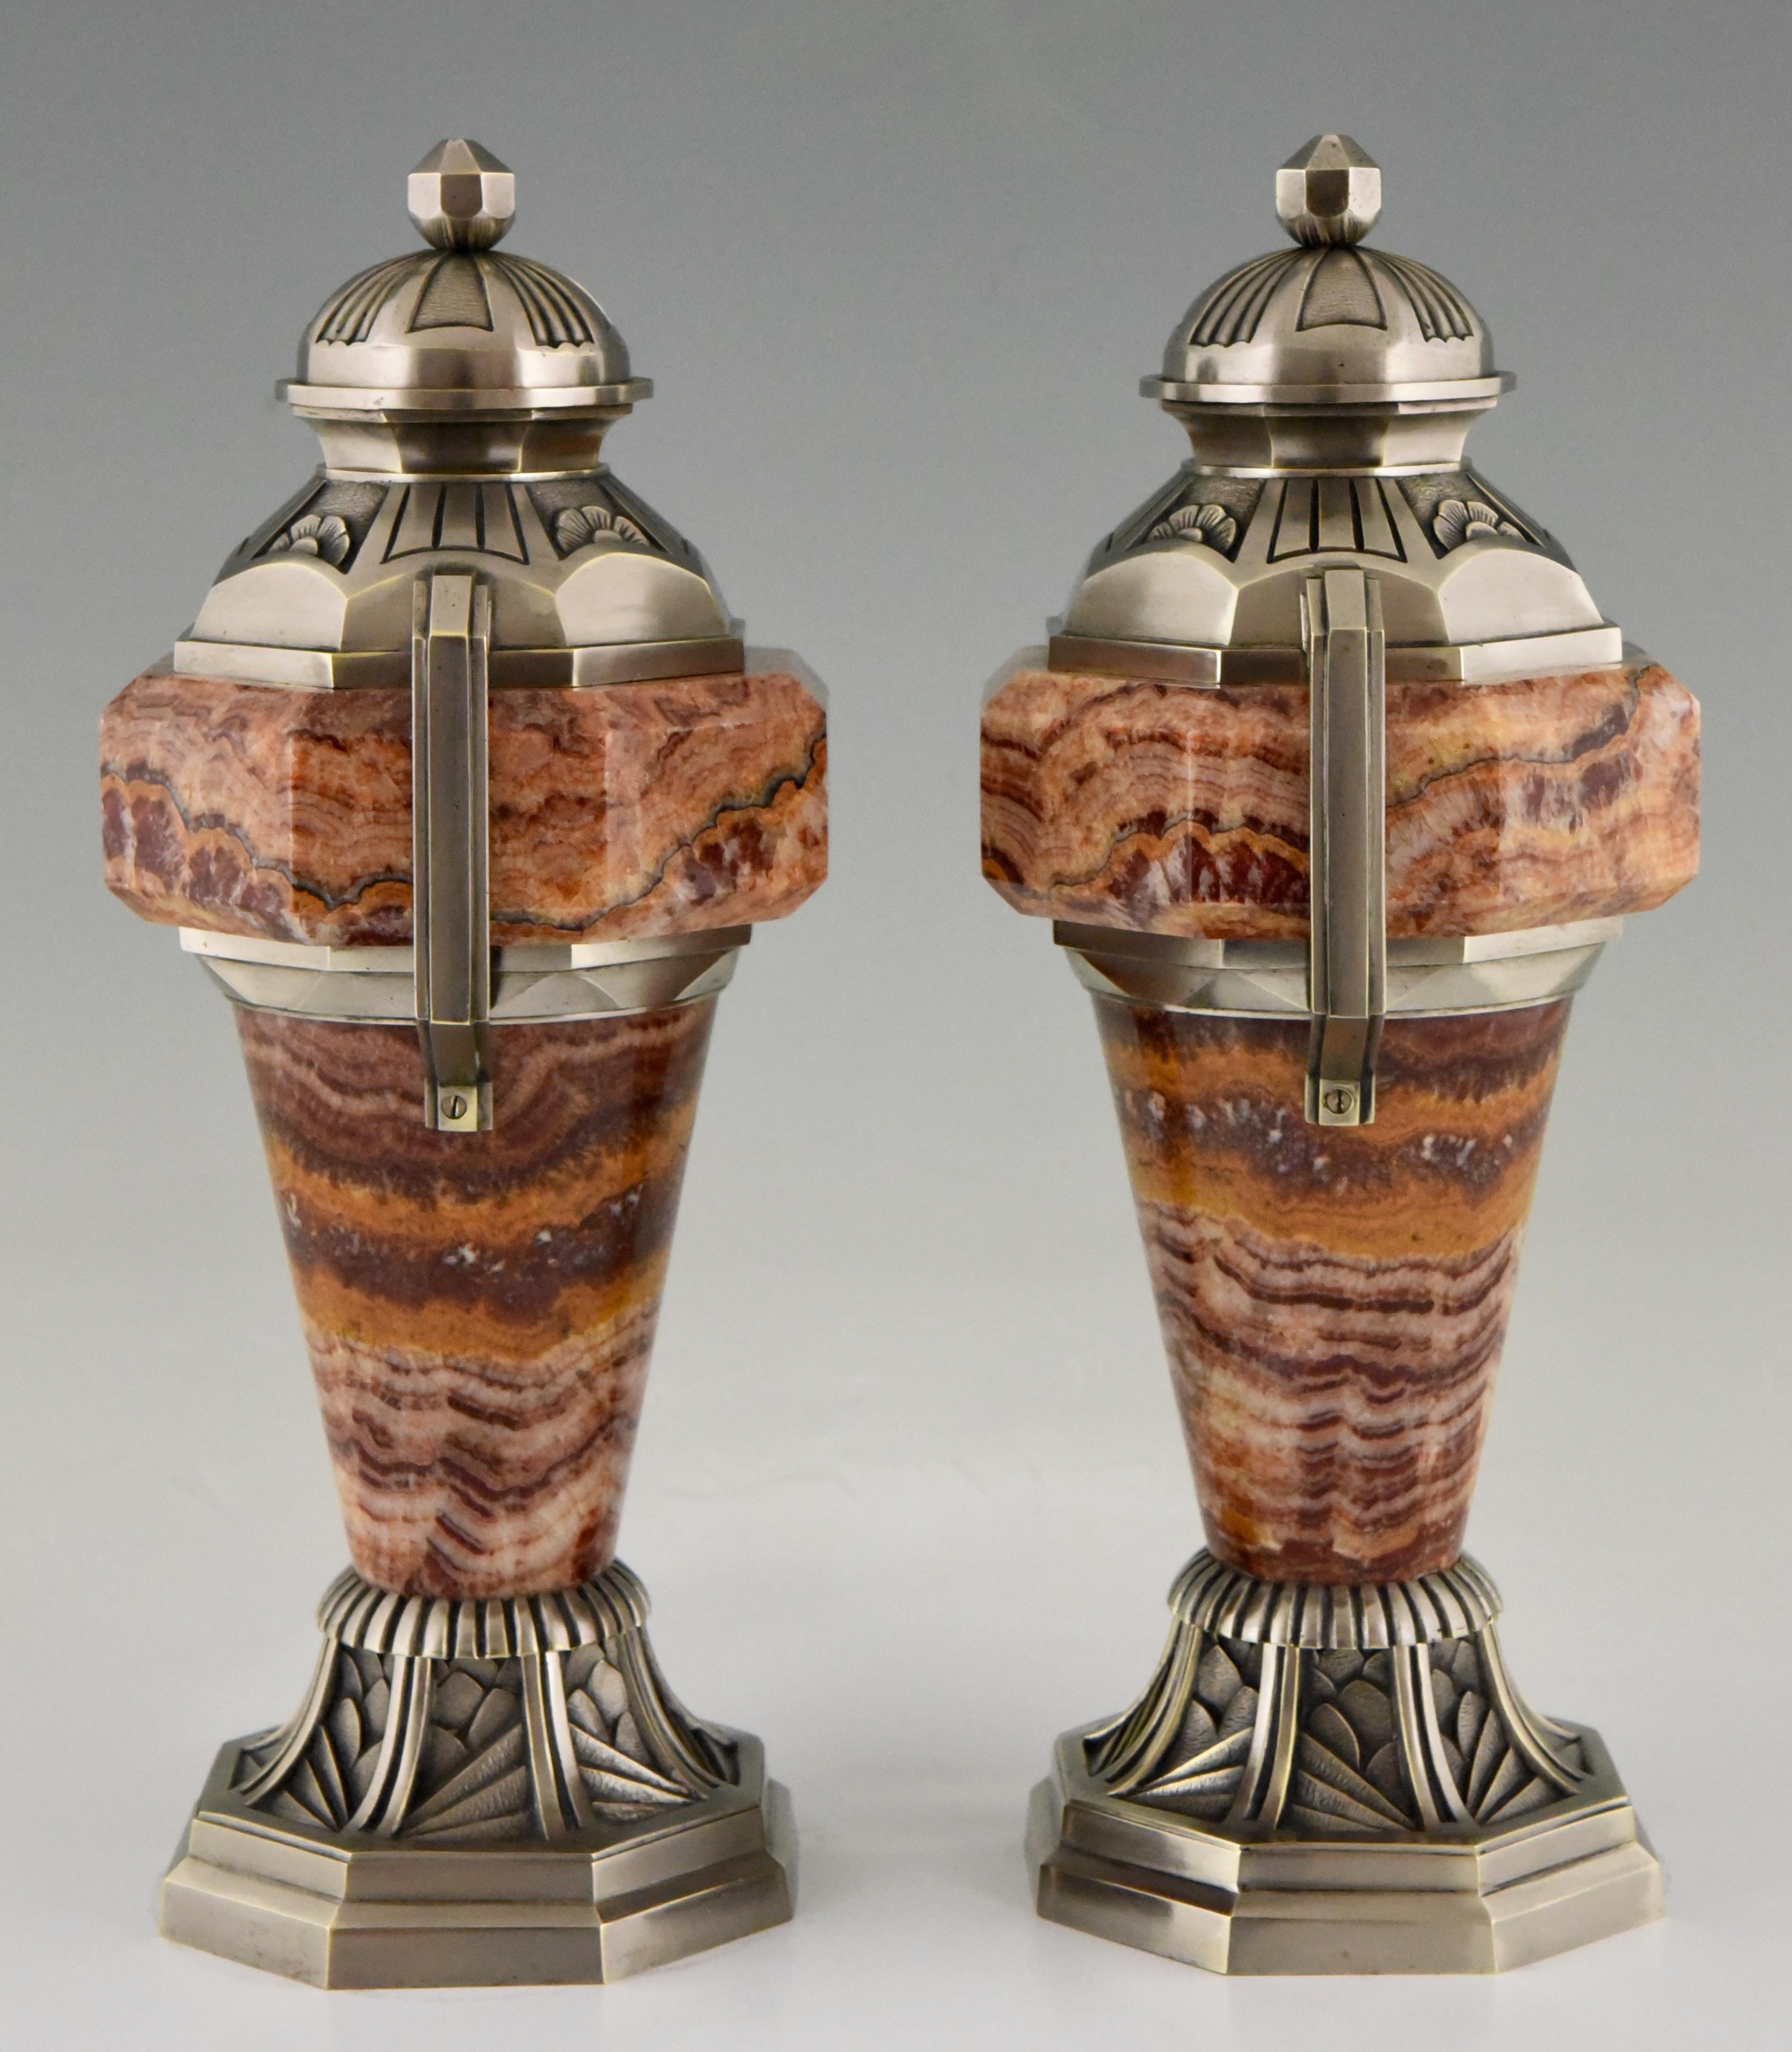 Early 20th Century French Art Deco Marble and Bronze Urns  1925 France